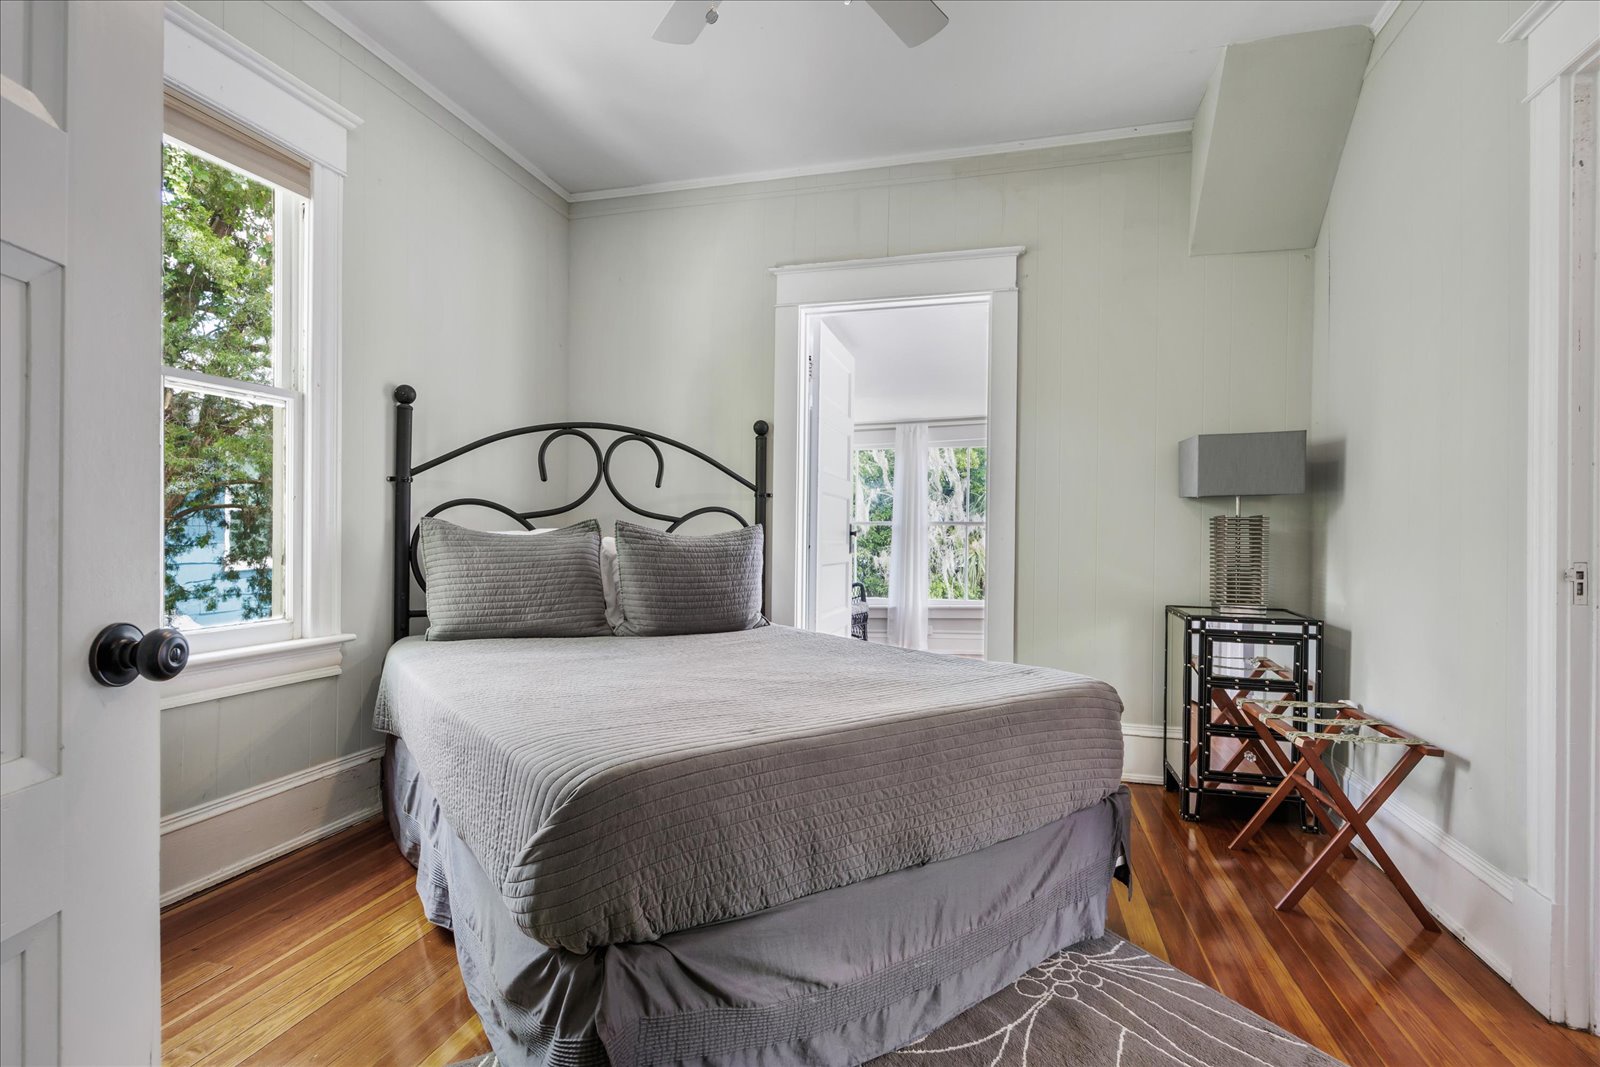 The first of two bedrooms offers a queen bed & ceiling fan